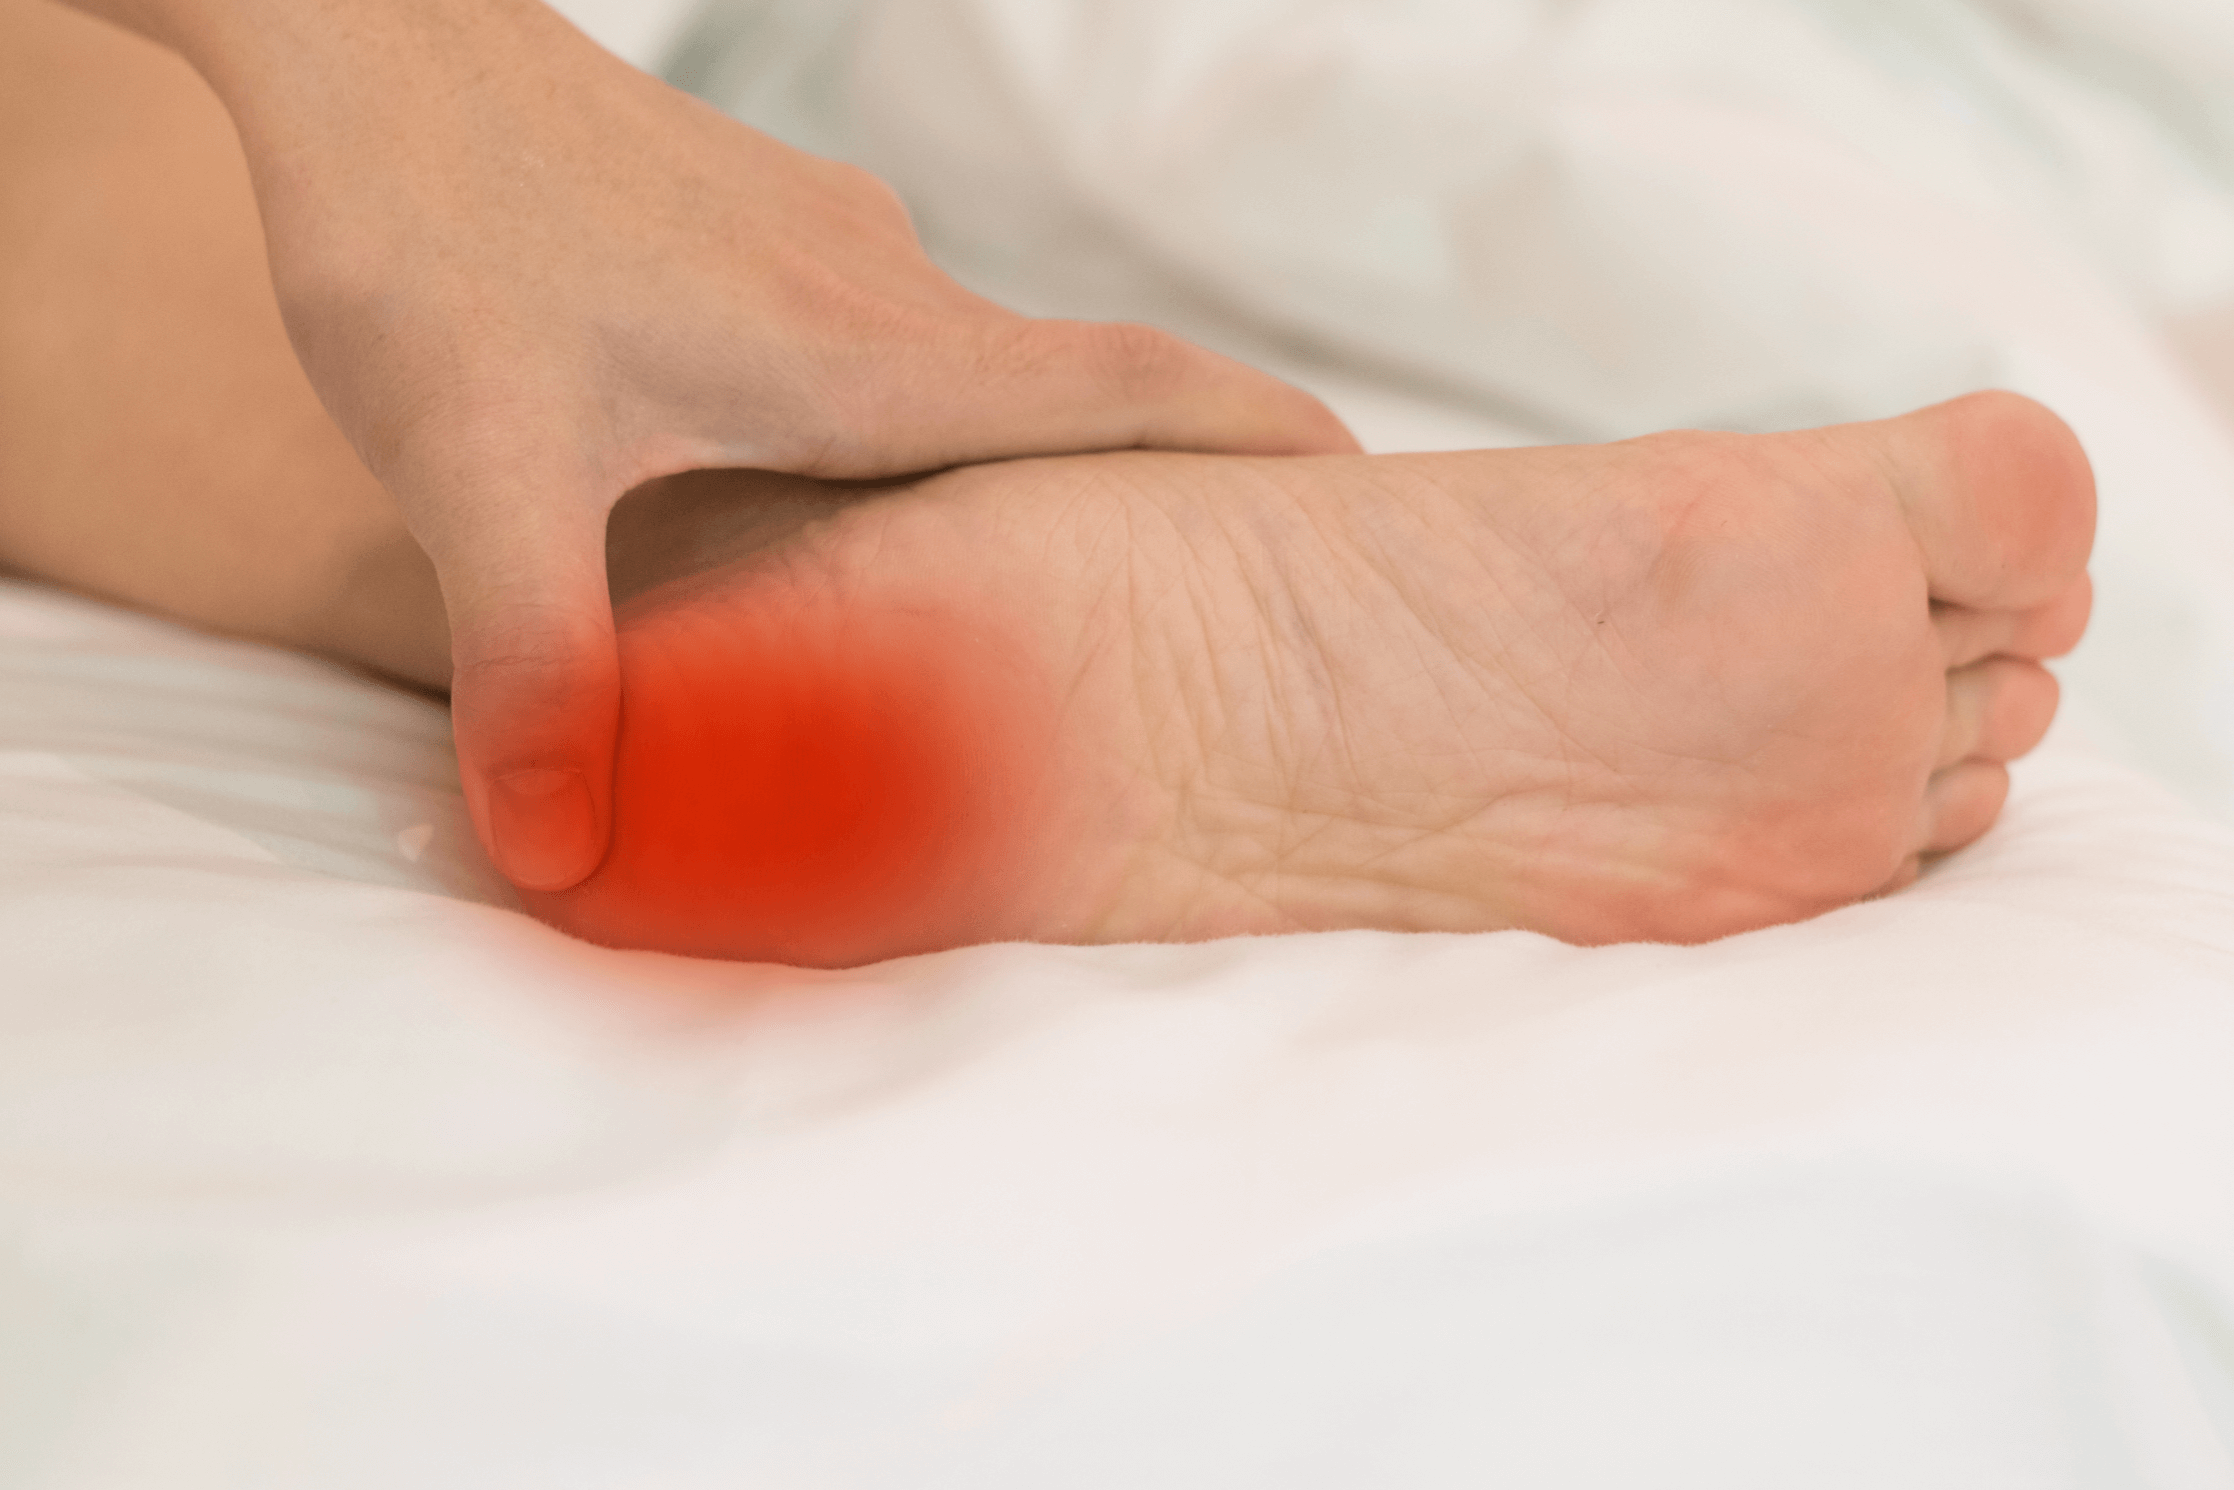 What are the causes of plantar fasciitis and heel spurs? - Quora